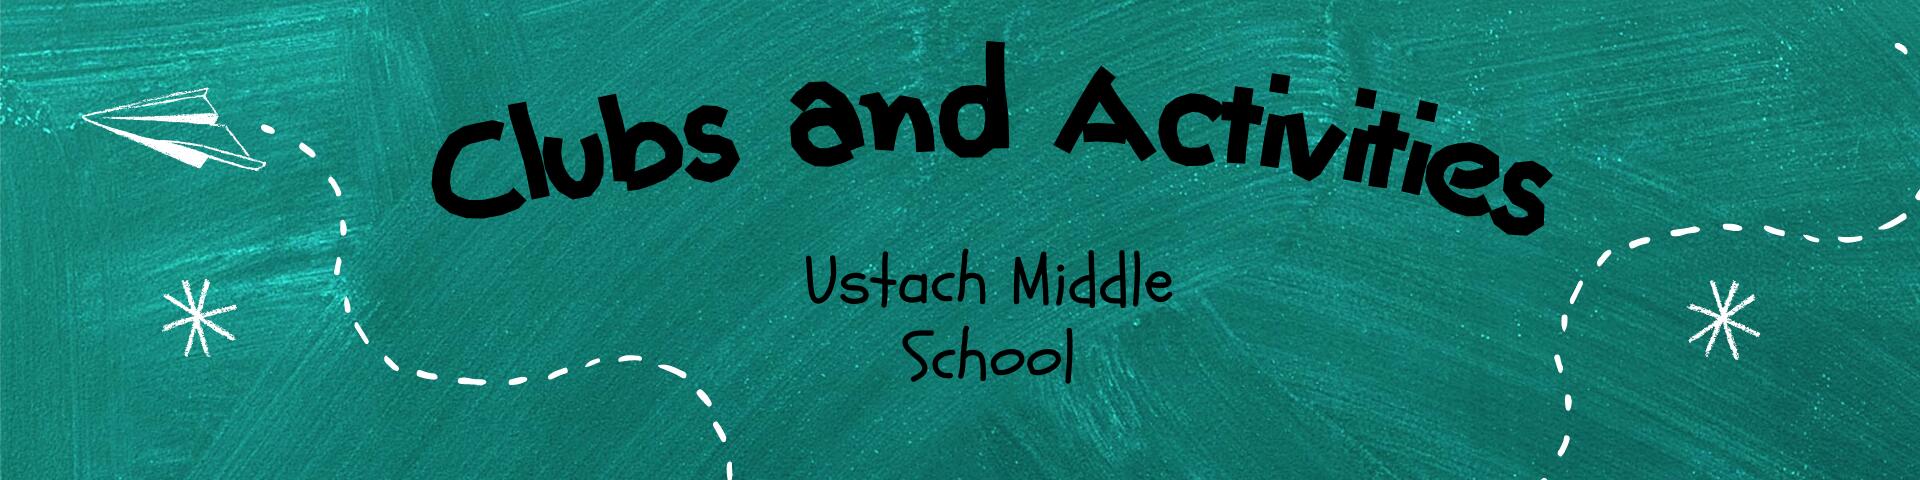 clubs and activities at ustach middle school